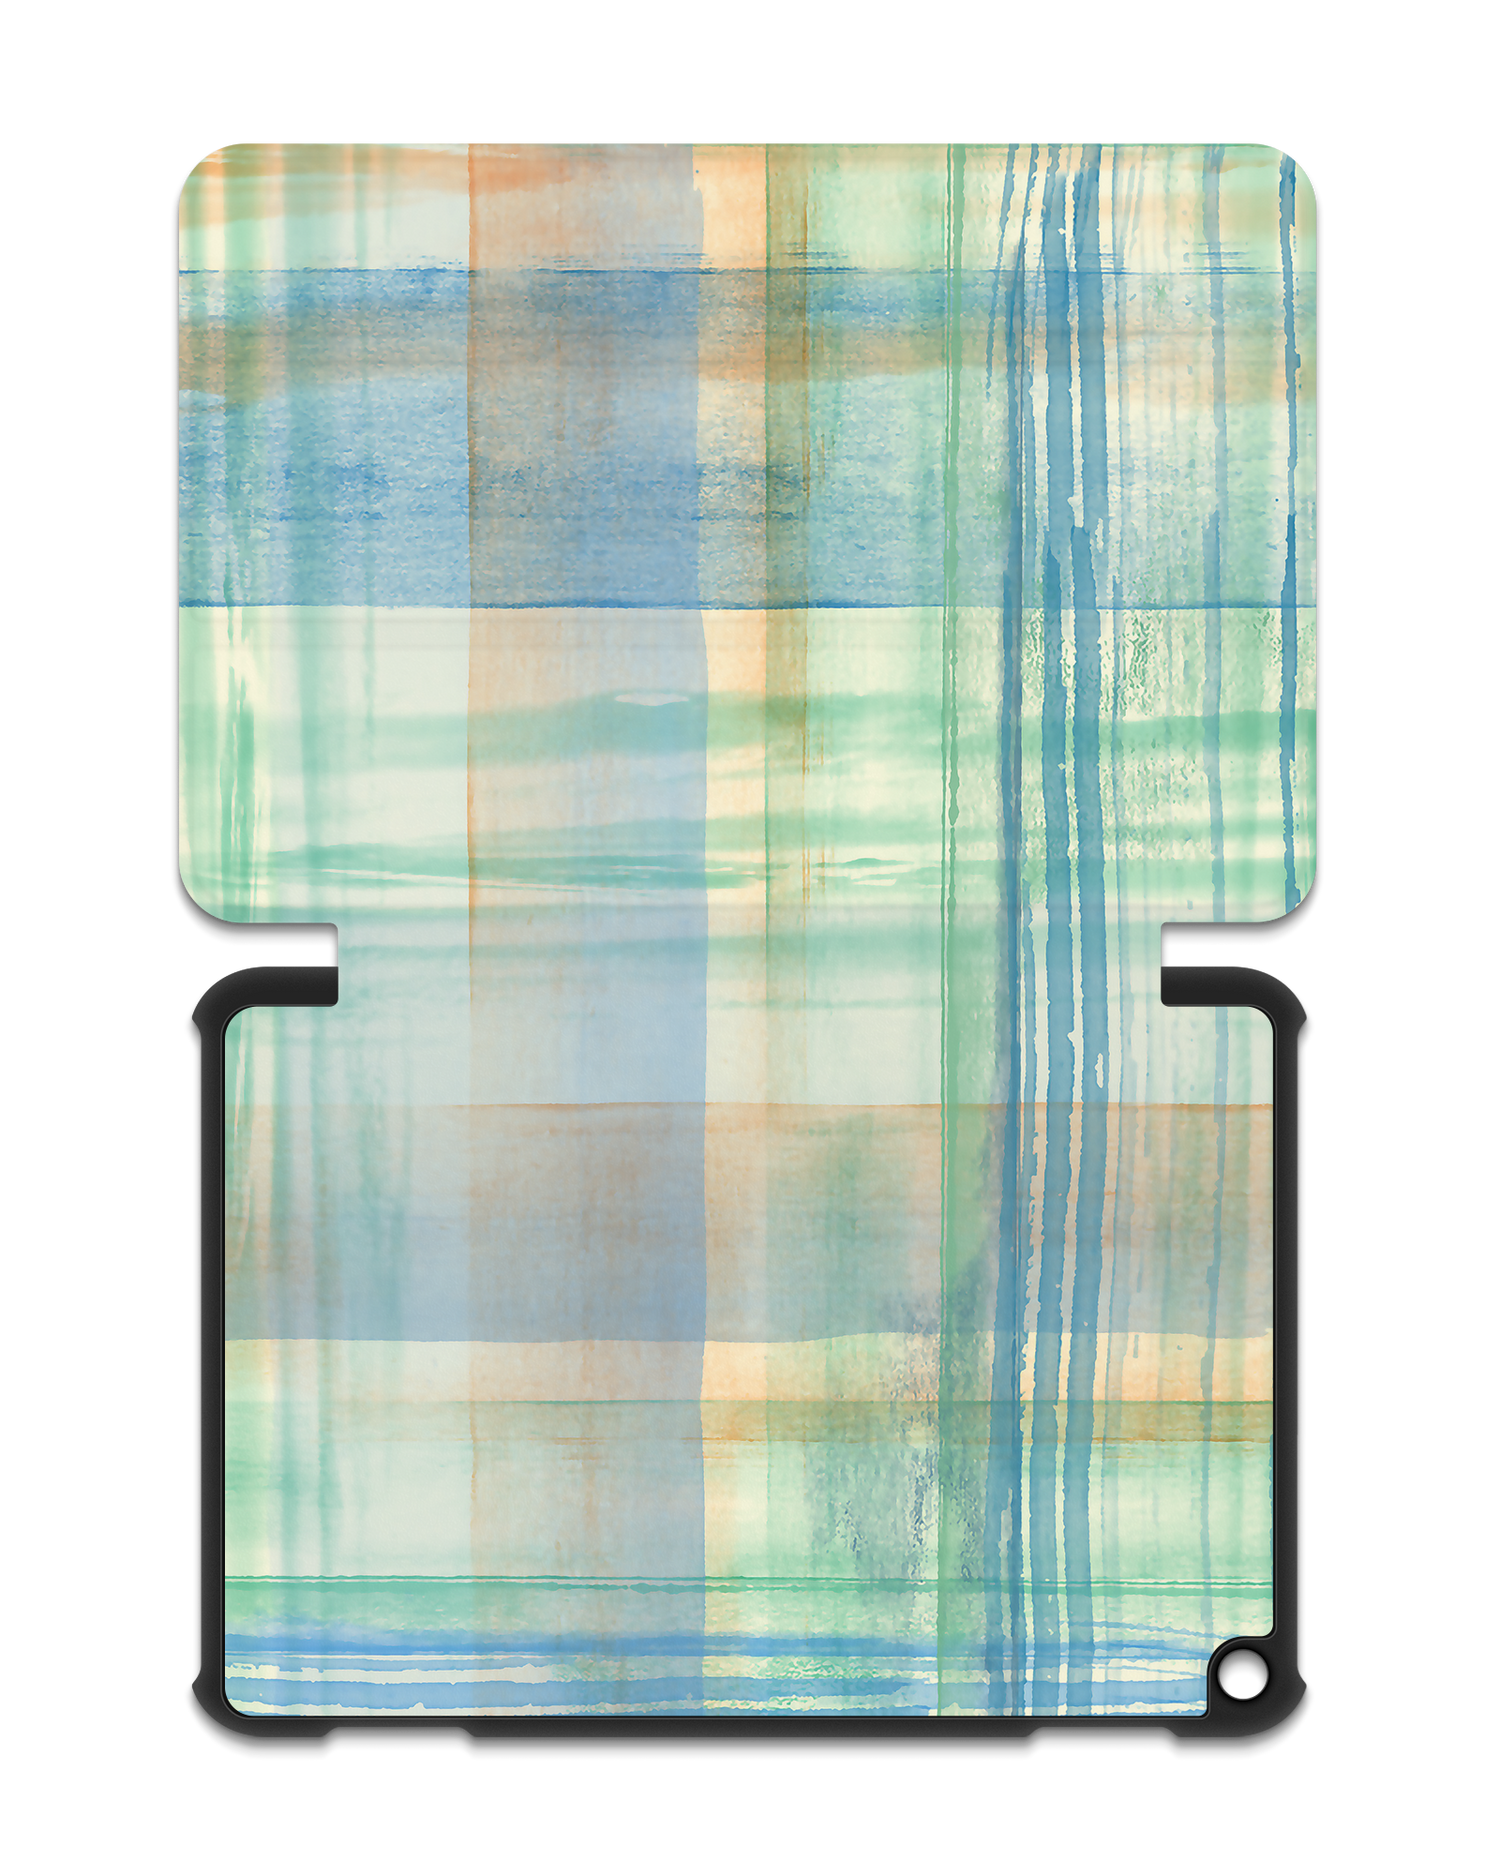 Washed Out Plaid Tablet Smart Case for Amazon Fire HD 8 (2022), Amazon Fire HD 8 Plus (2022), Amazon Fire HD 8 (2020), Amazon Fire HD 8 Plus (2020): Opened